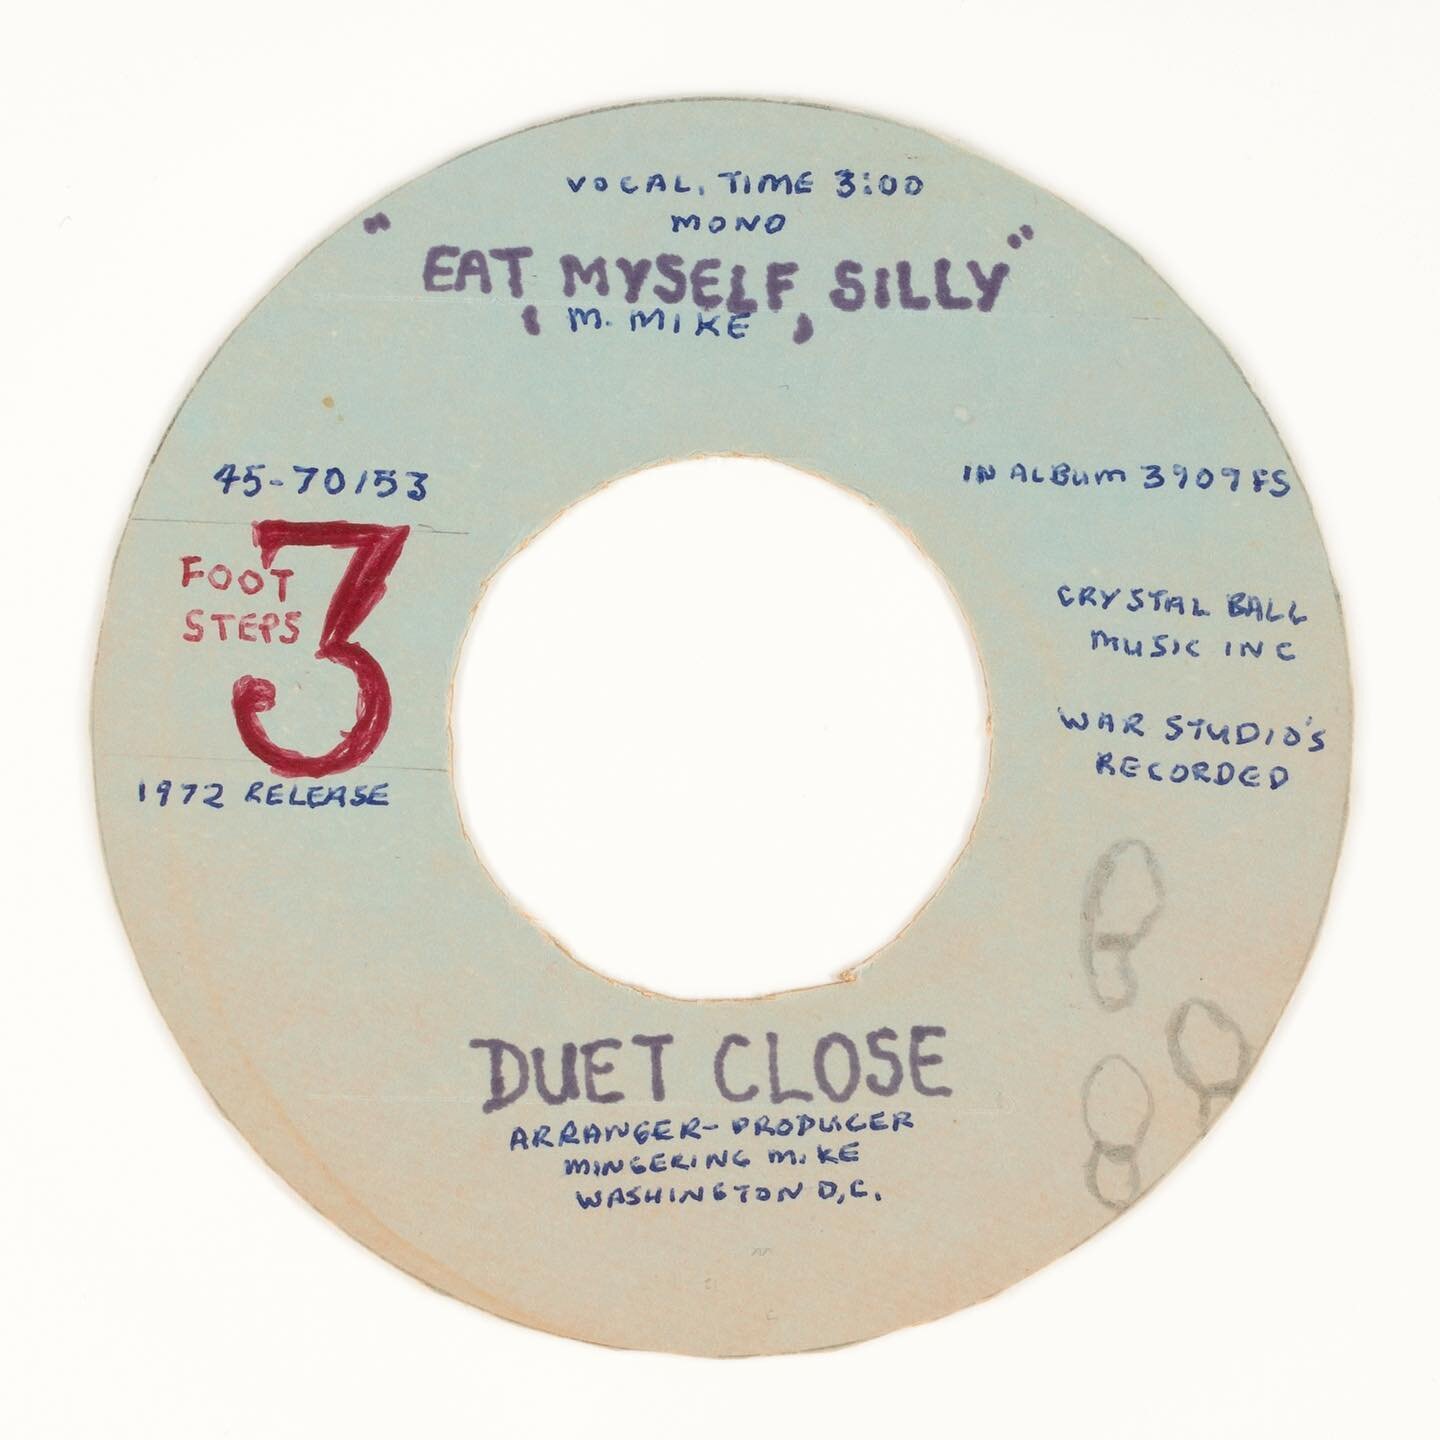 The Duet Close - &ldquo;Eat Myself Silly&rdquo; b/w &ldquo;And I&rsquo;m Loosing Weight&rdquo; (3 Footsteps 45-69054/44-70153, 1972) &copy; Mingering Mike. Smithsonian American Art Museum. Gift of Mike Wilkins and Sheila Duignan and museum purchase t